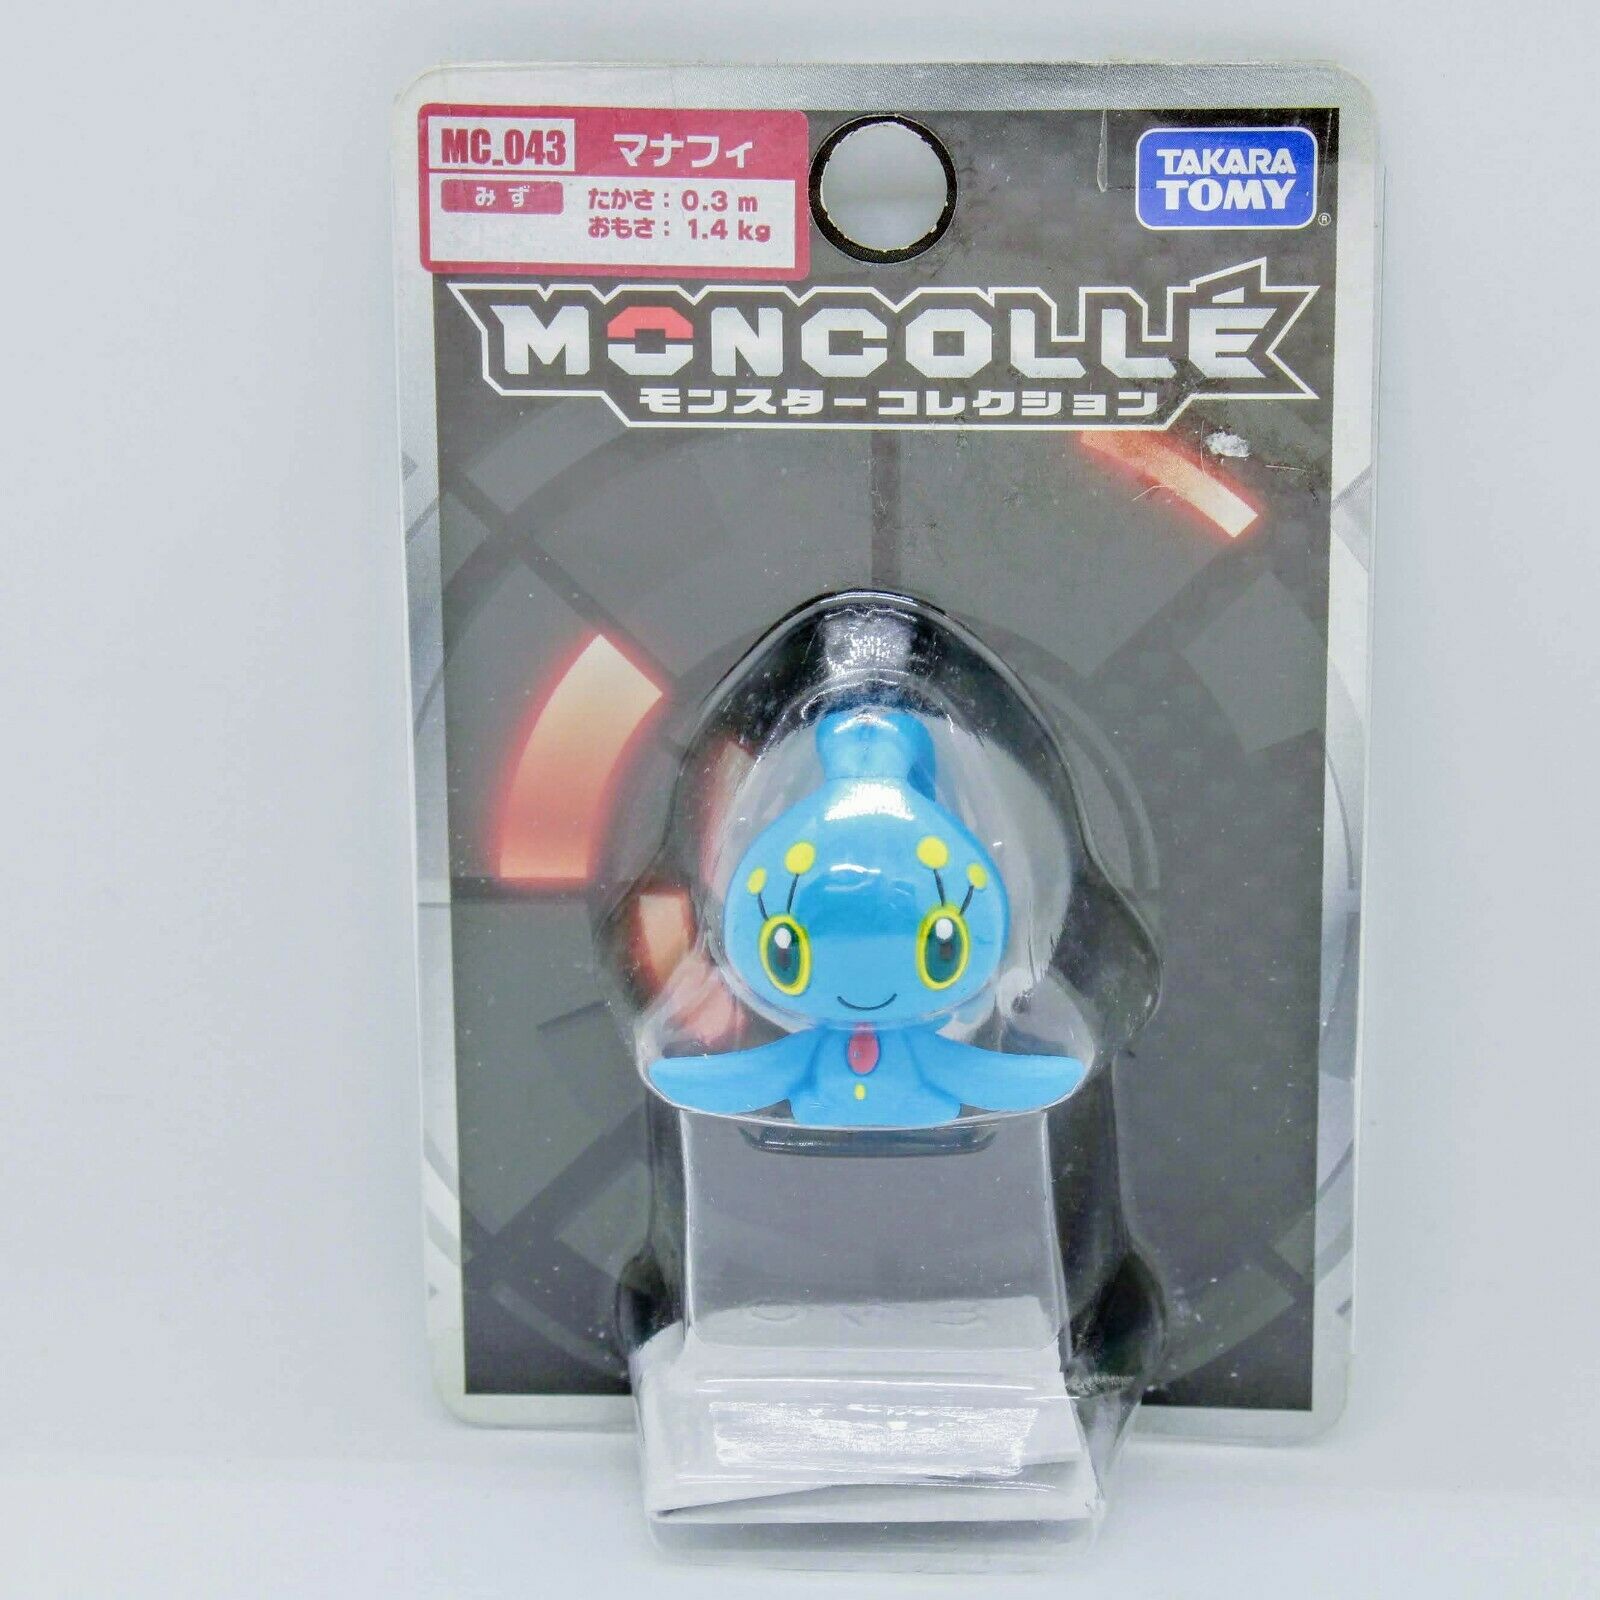 Pokemon Manaphy - Monster Collection Moncolle MC-043 2" Figure